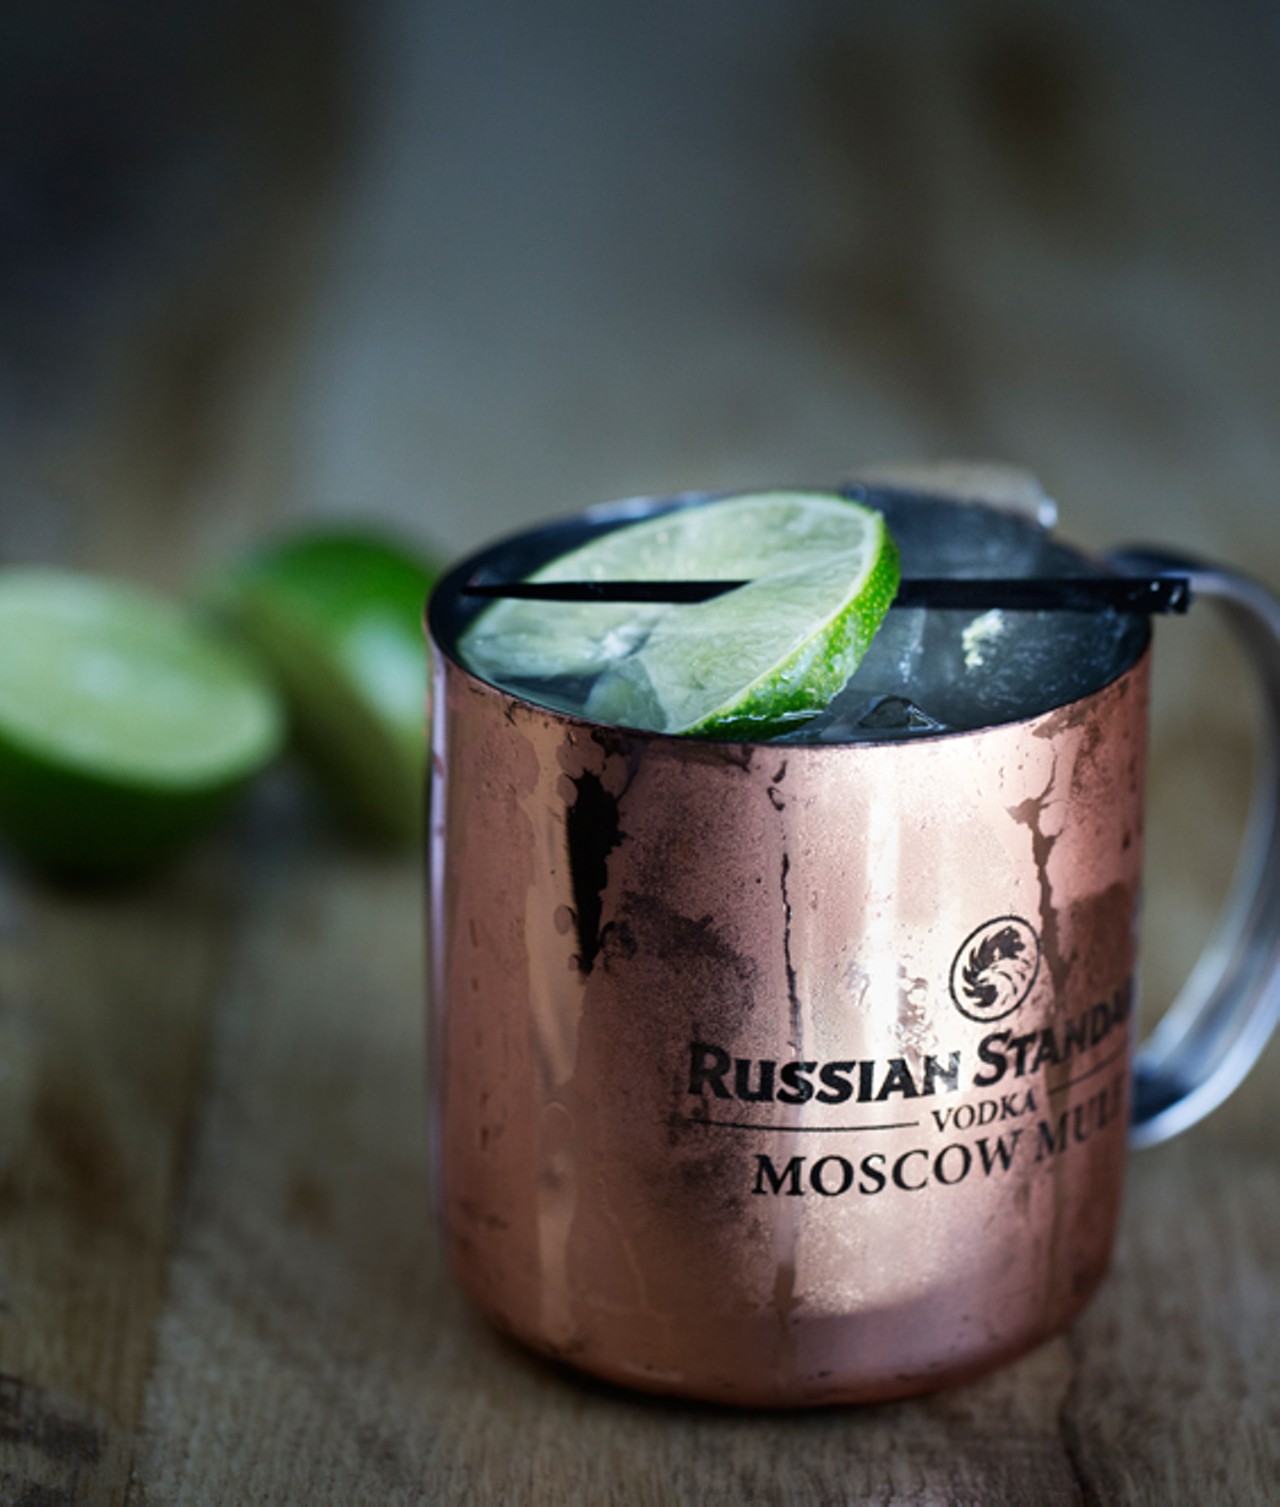 The "Moscow Mule" is&nbsp;vodka, ginger beer and lime.